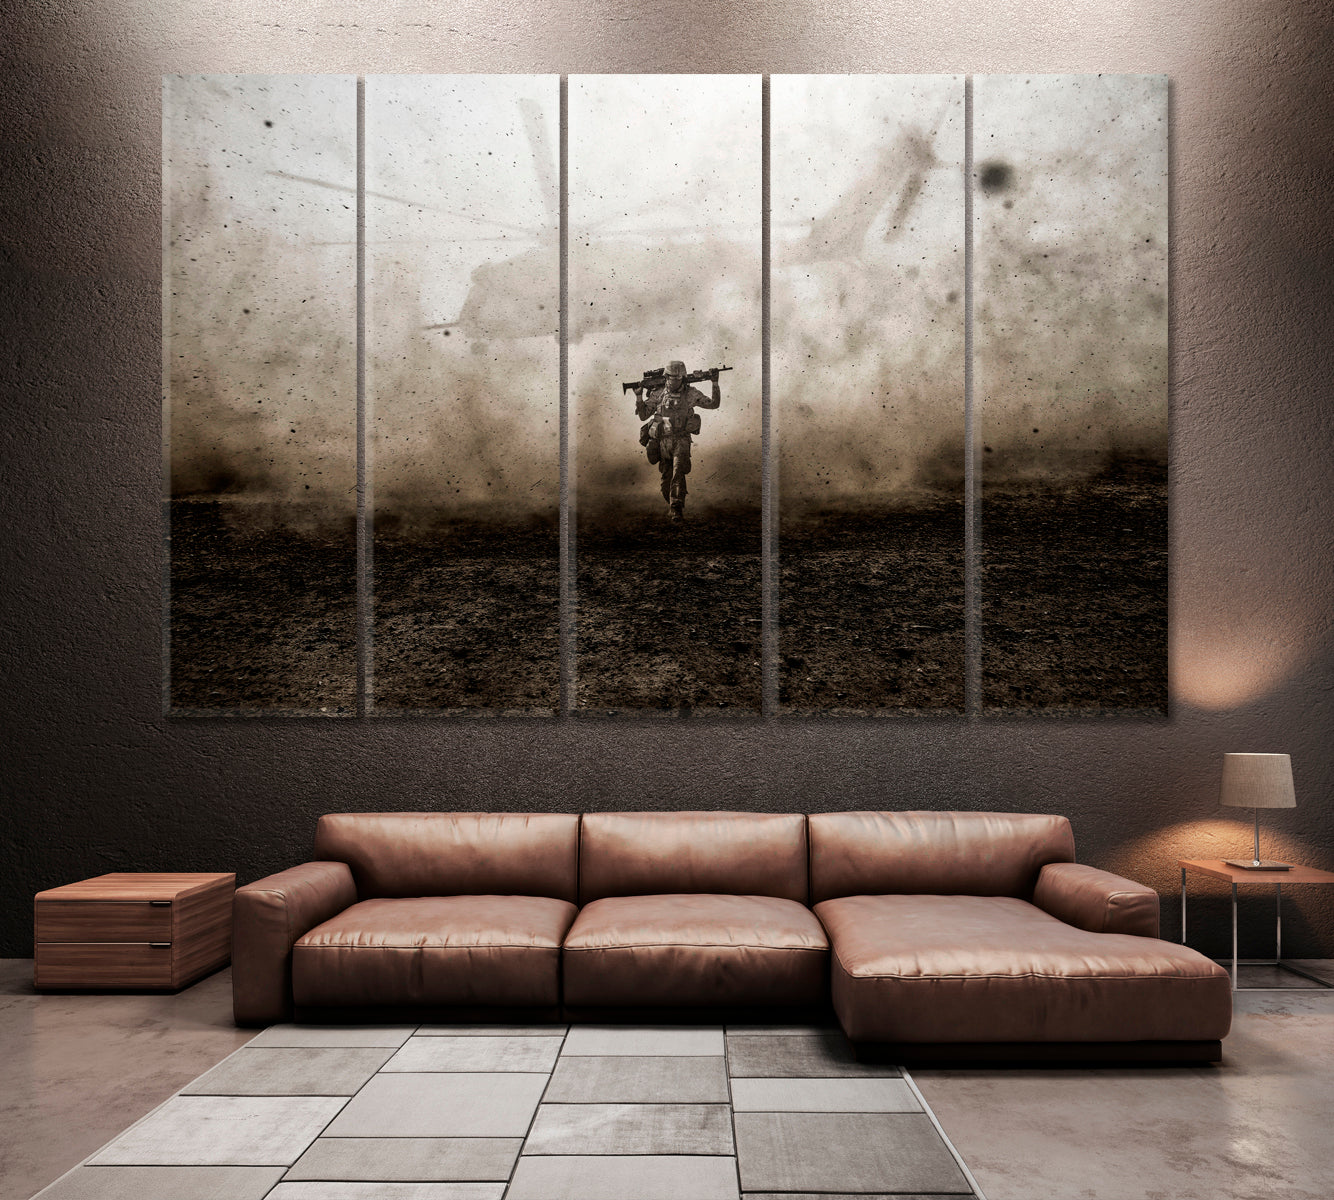 Helicopter Behind American Soldier Canvas Print ArtLexy 5 Panels 36"x24" inches 